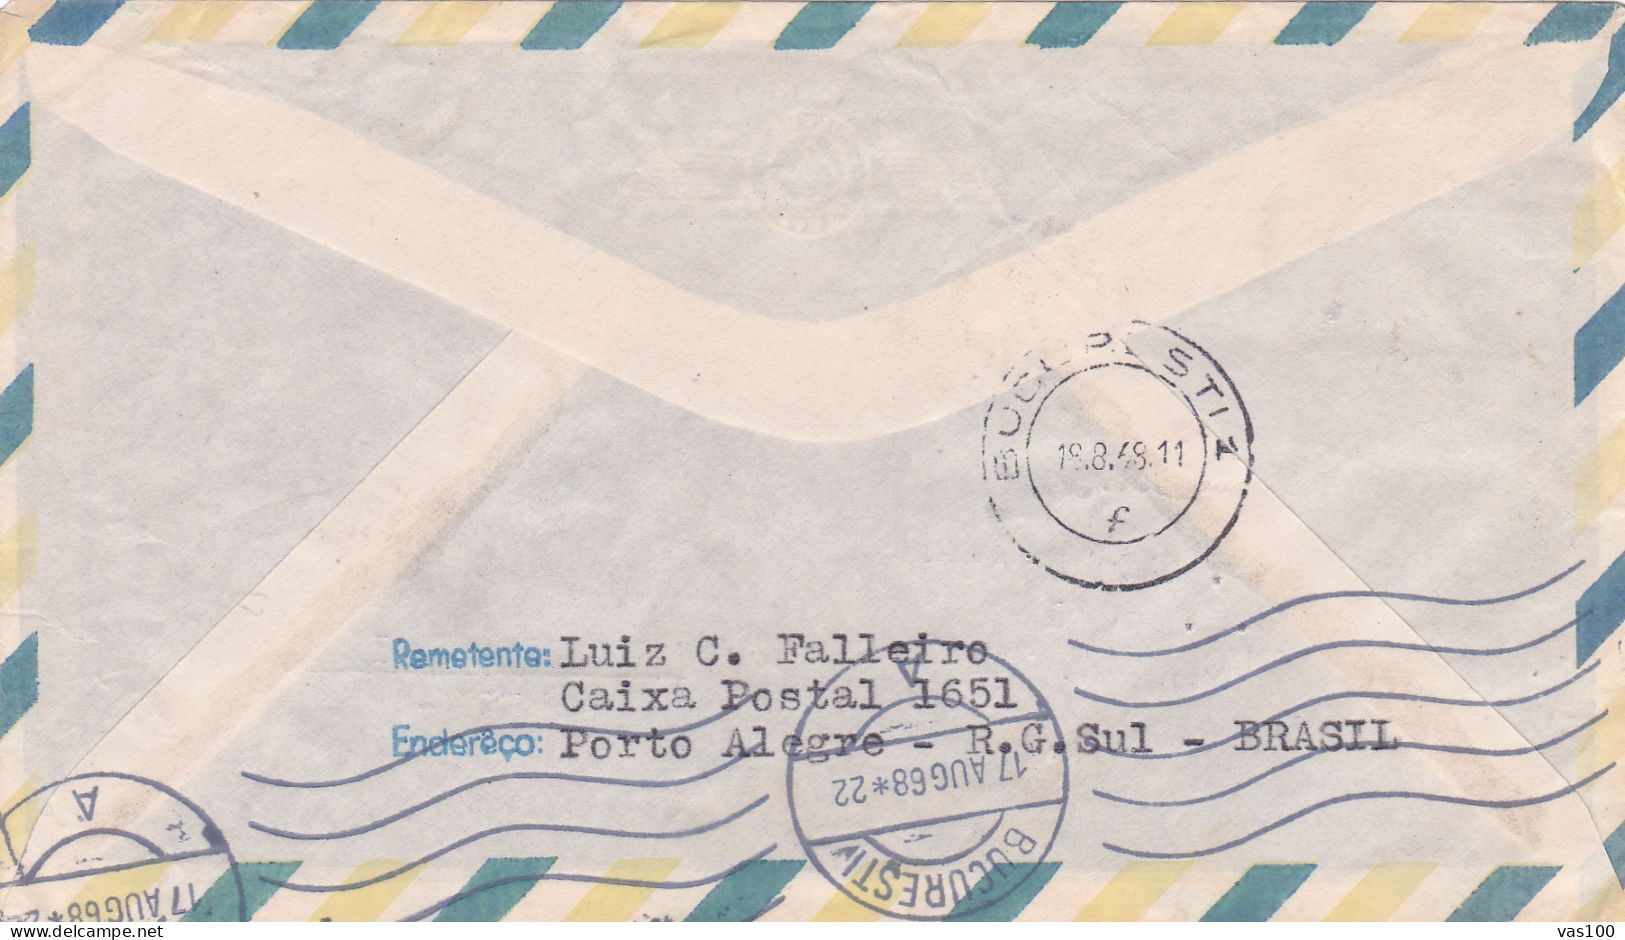 BIRDS STAMPS ON COVERS, POSTAL AEREO COVERS 1968,BRAZIL - Covers & Documents